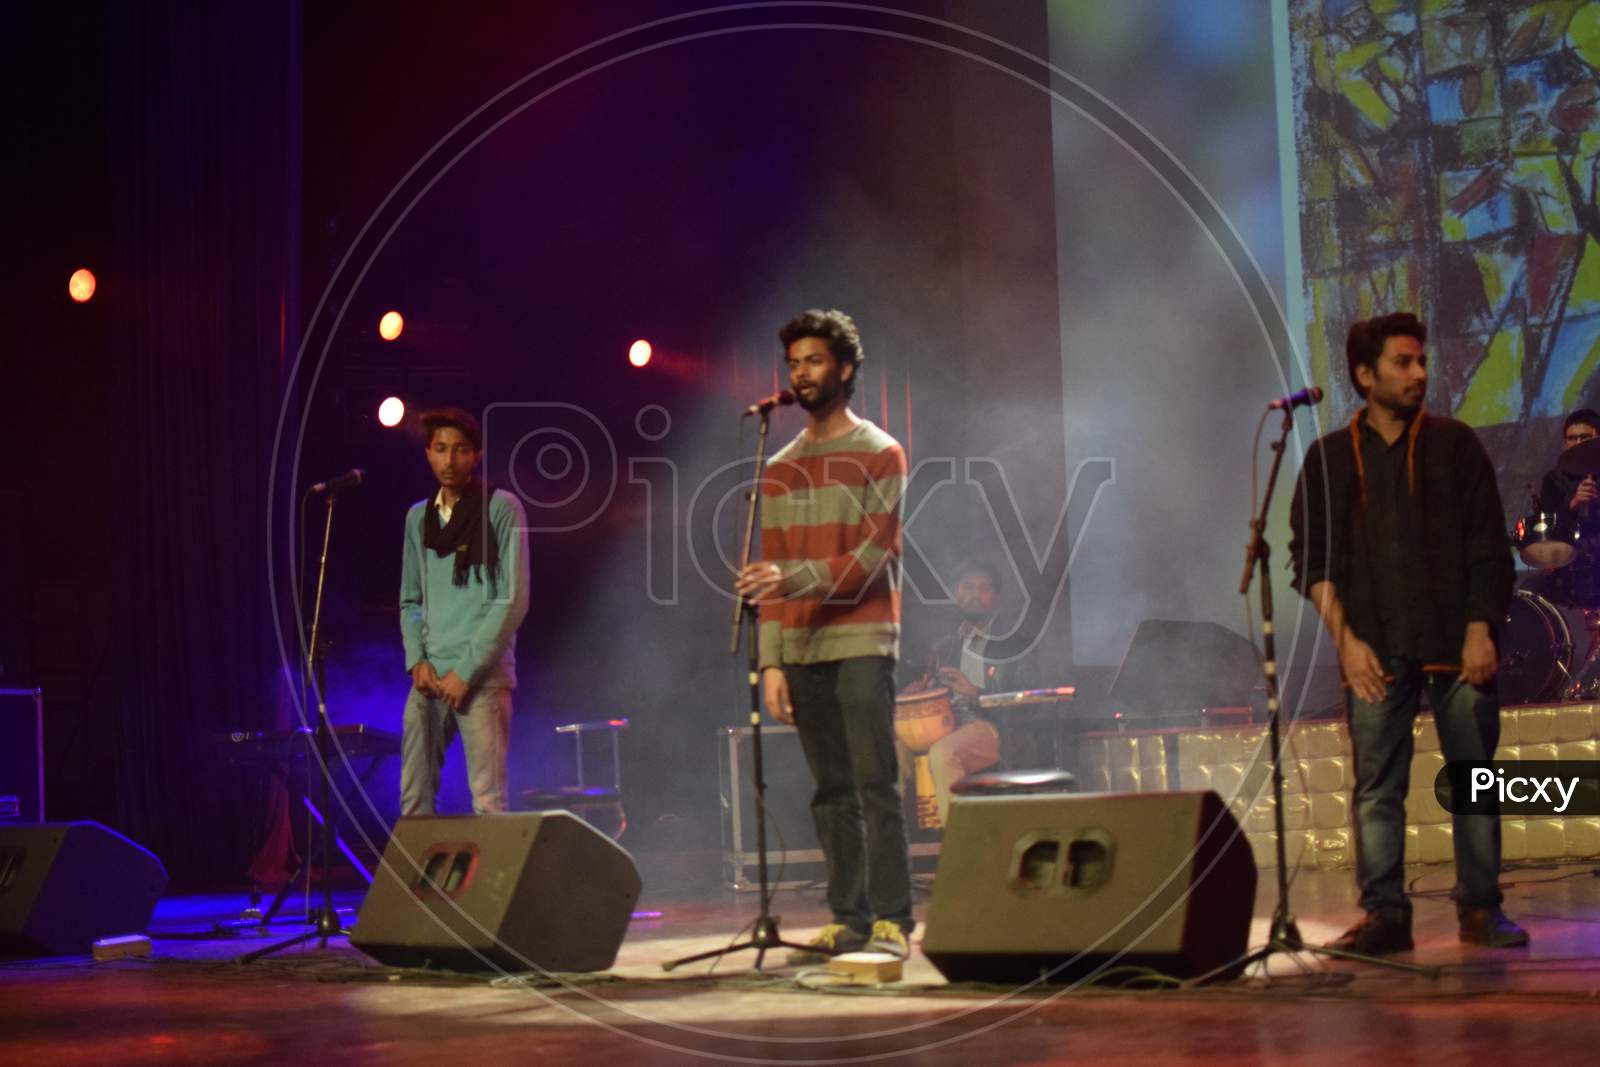 Jawaharlal Nehru University, Delhi students during a live performance on stage